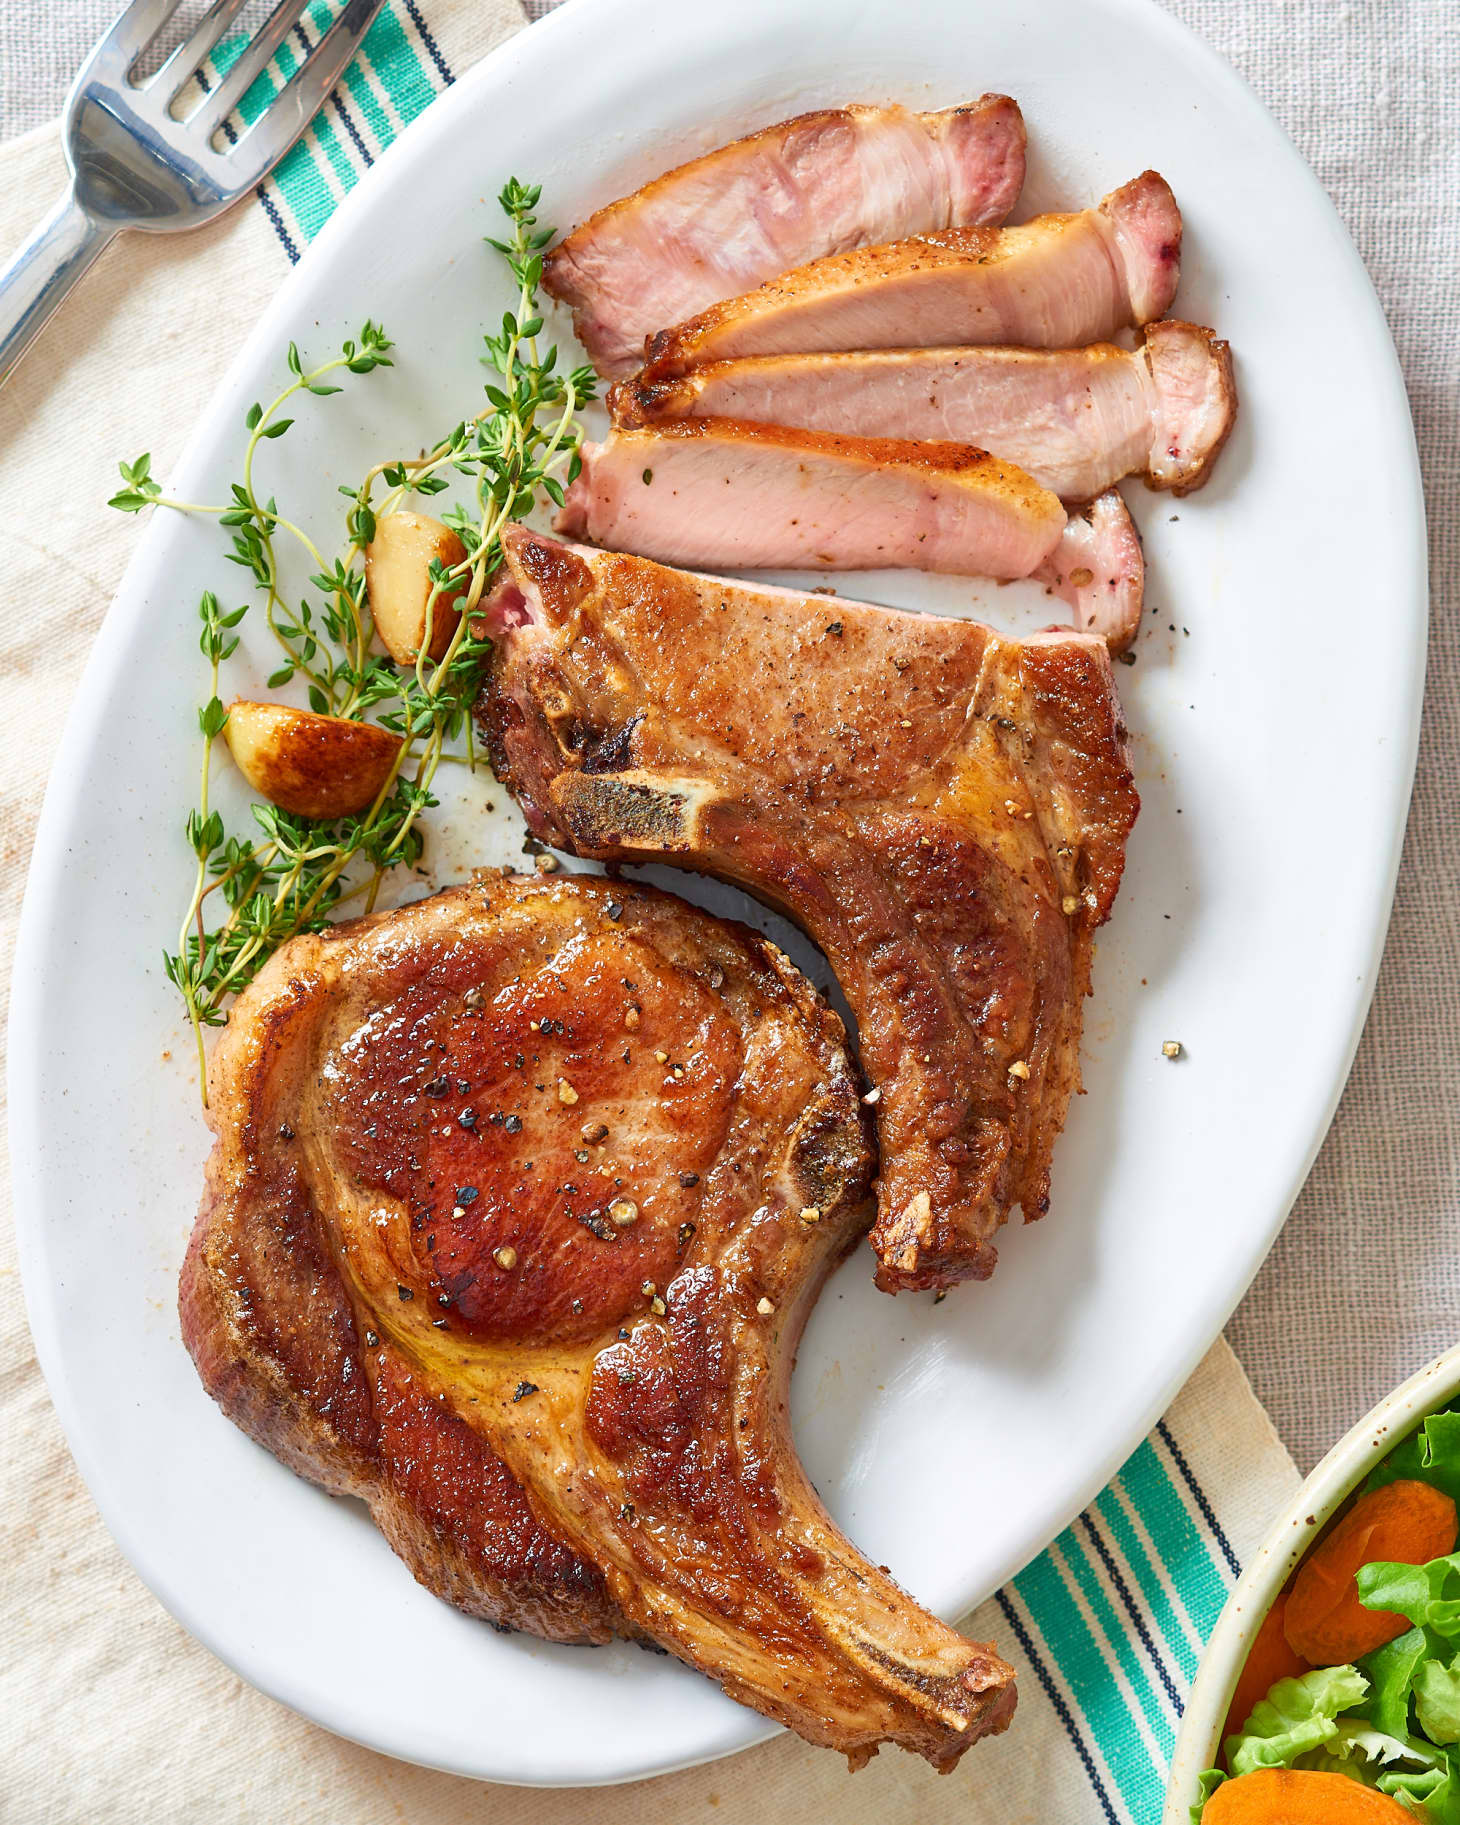 How To Make Easy Pan-Fried Pork Chops on the Stove | Kitchn